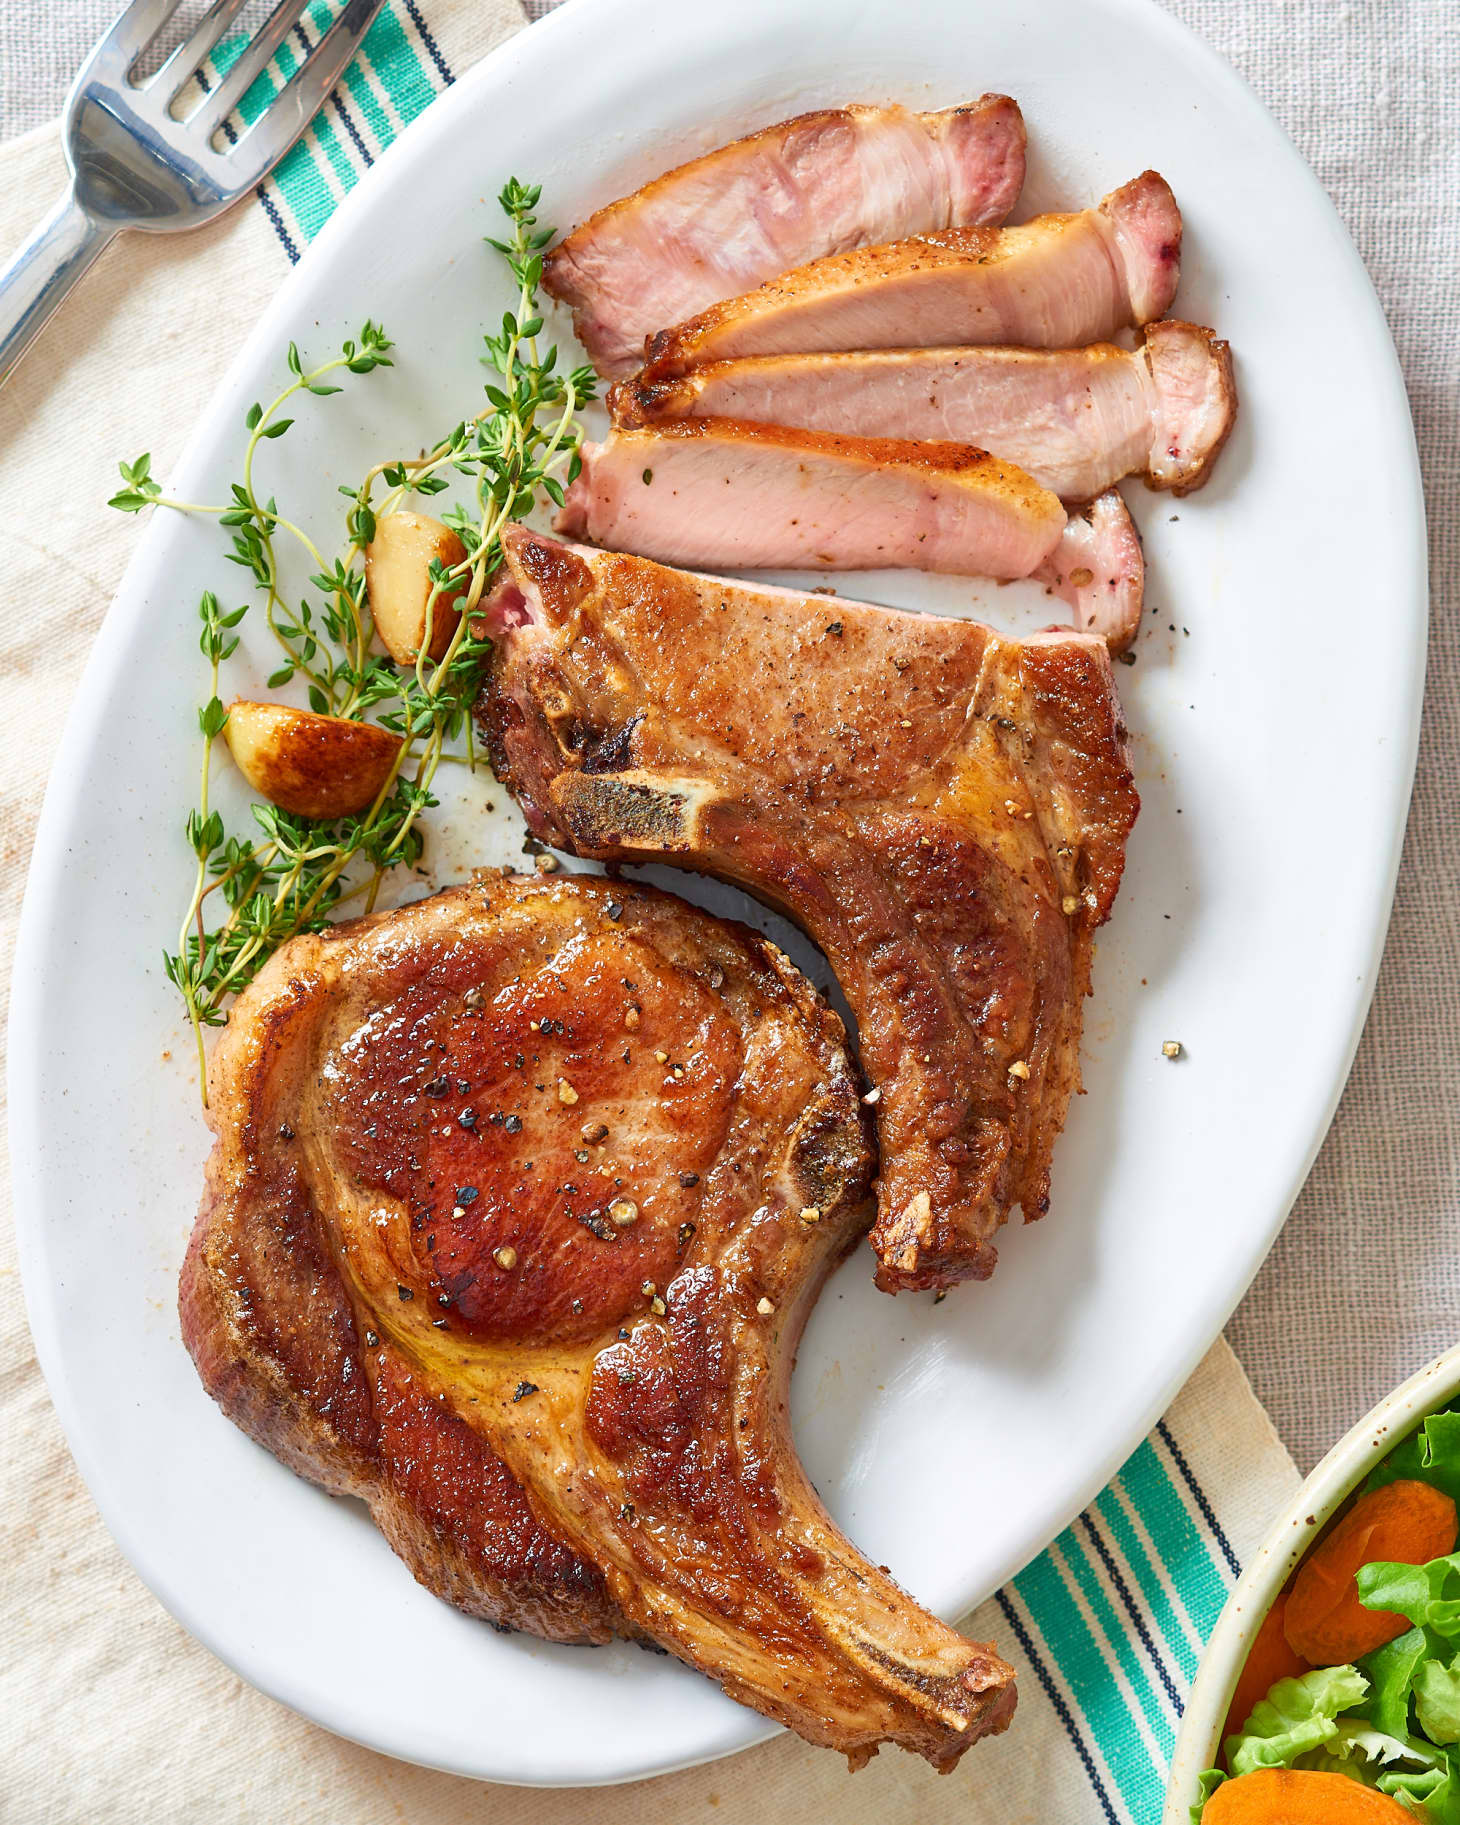 How To Make Easy Pan-Fried Pork Chops on the Stove | Kitchn